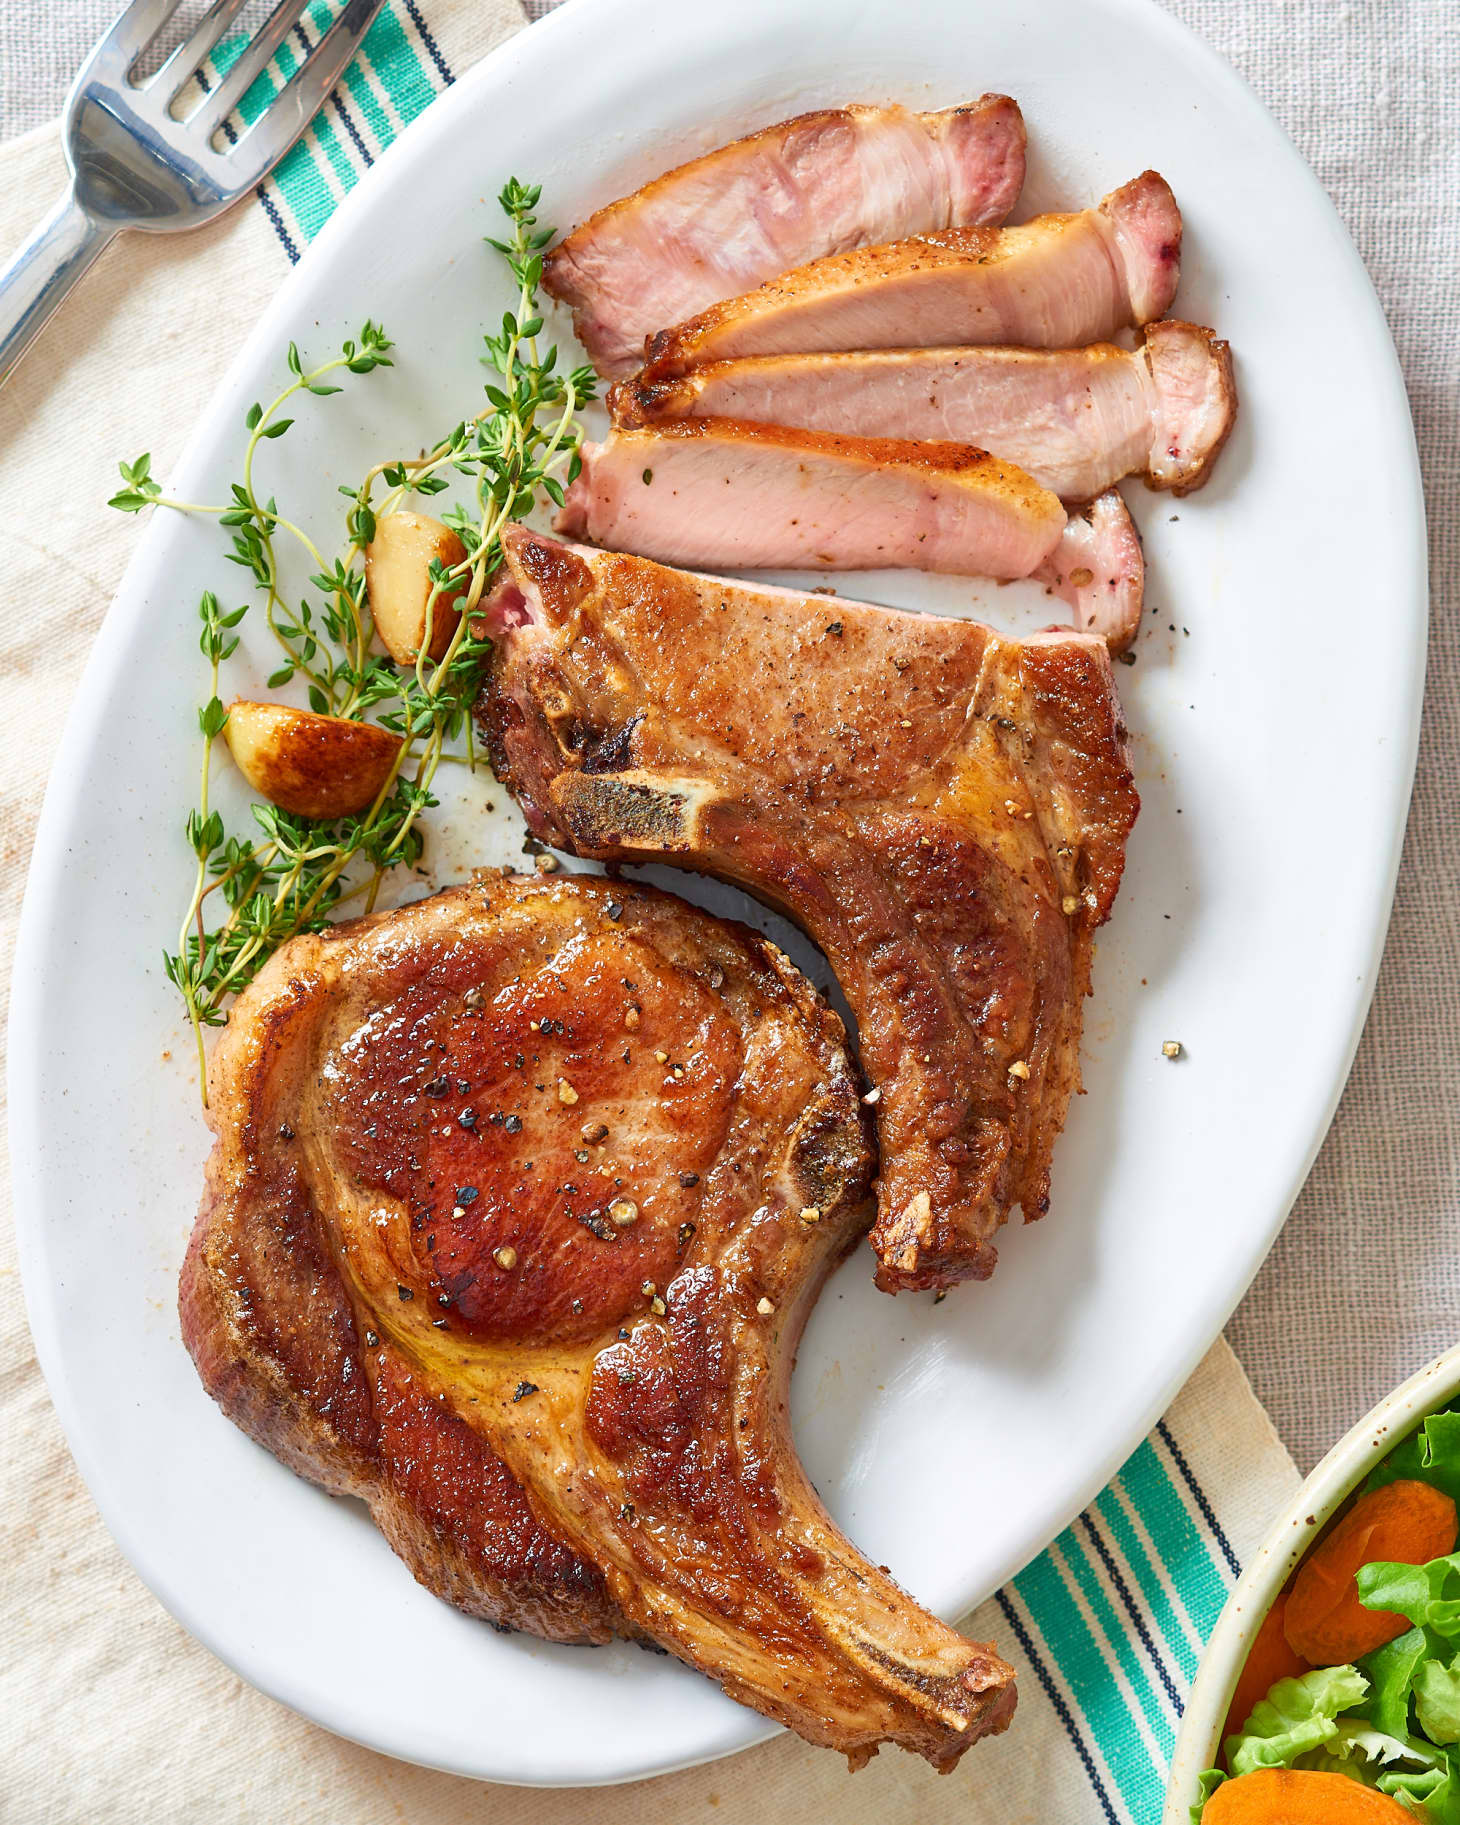 How To Make Easy Pan-Fried Pork Chops on the Stove | Kitchn